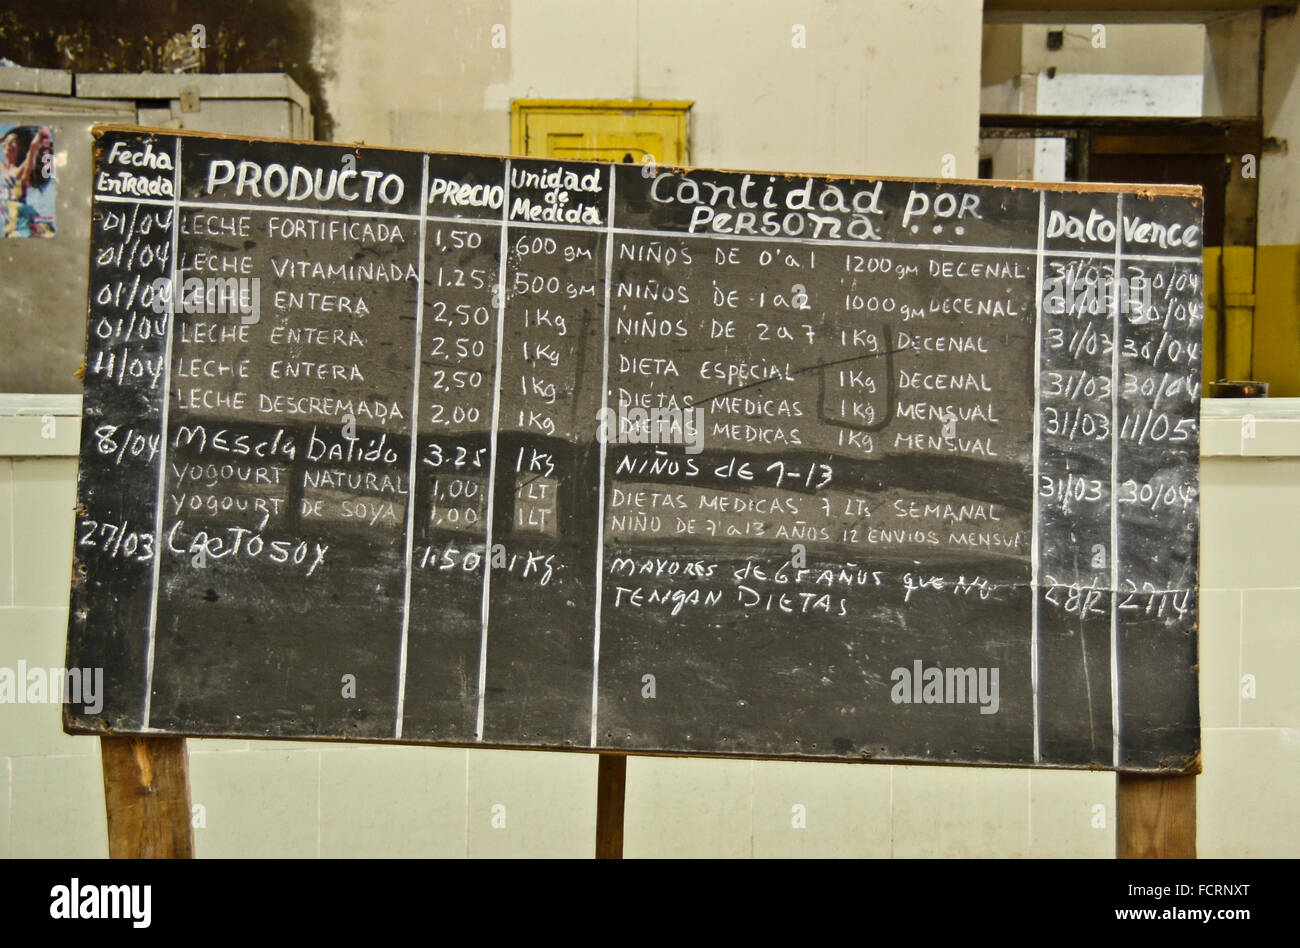 Board listing products for sale at government store (bodega) where ration cards are used, Vedado district, Havana, Cuba Stock Photo